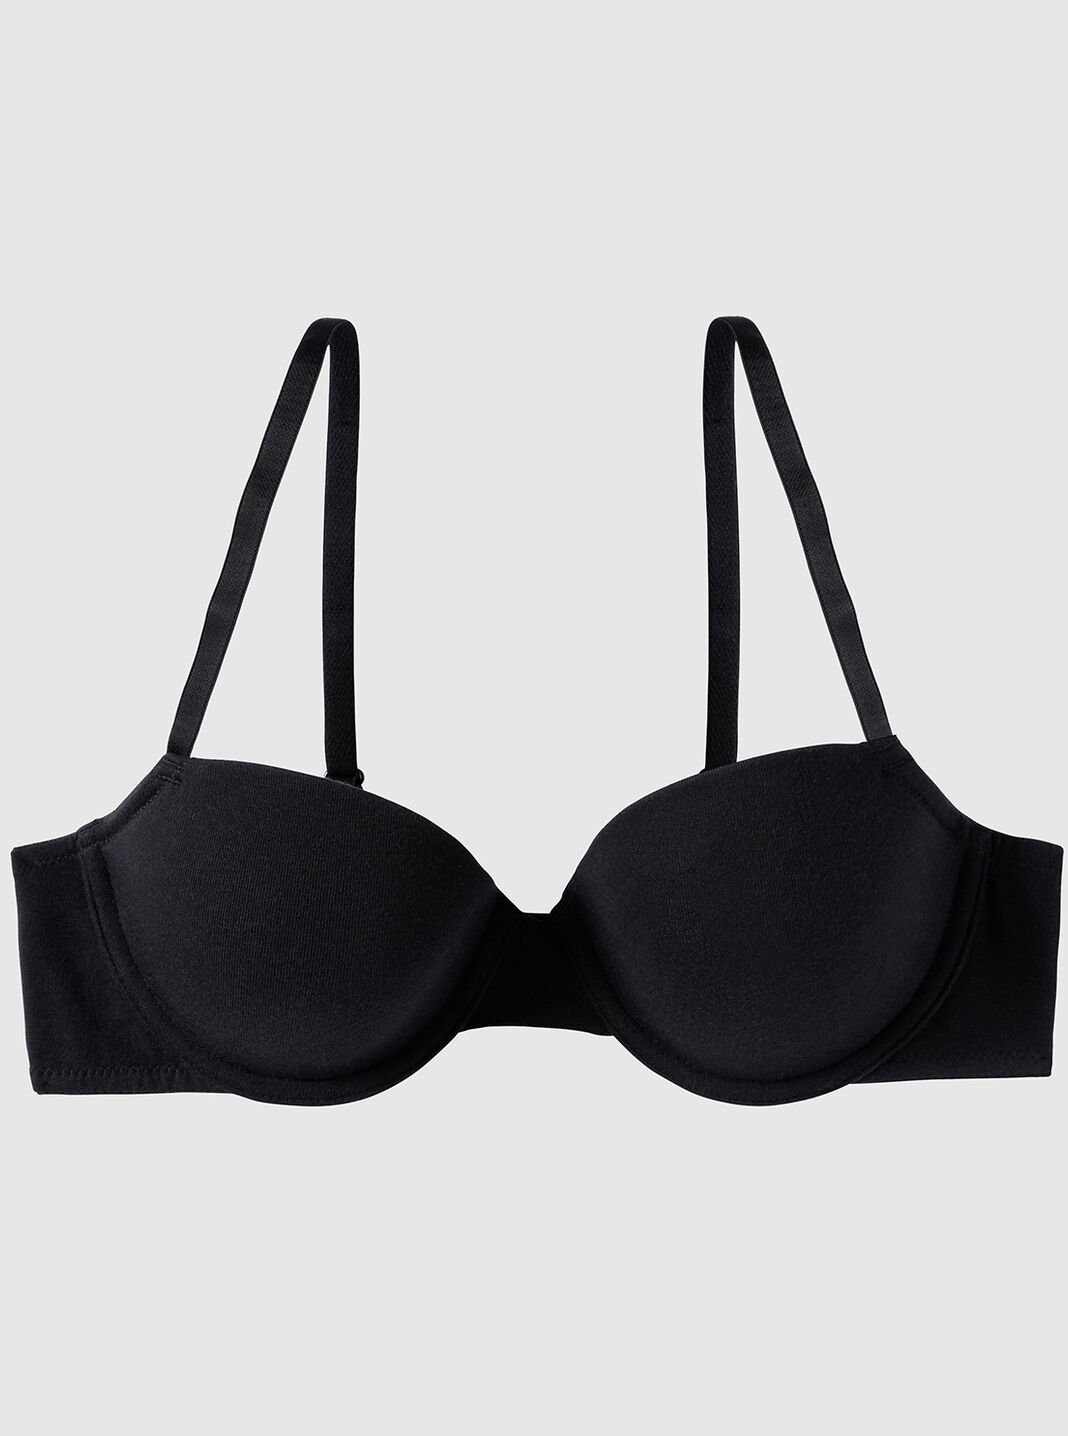 Shop Our Bra Collections